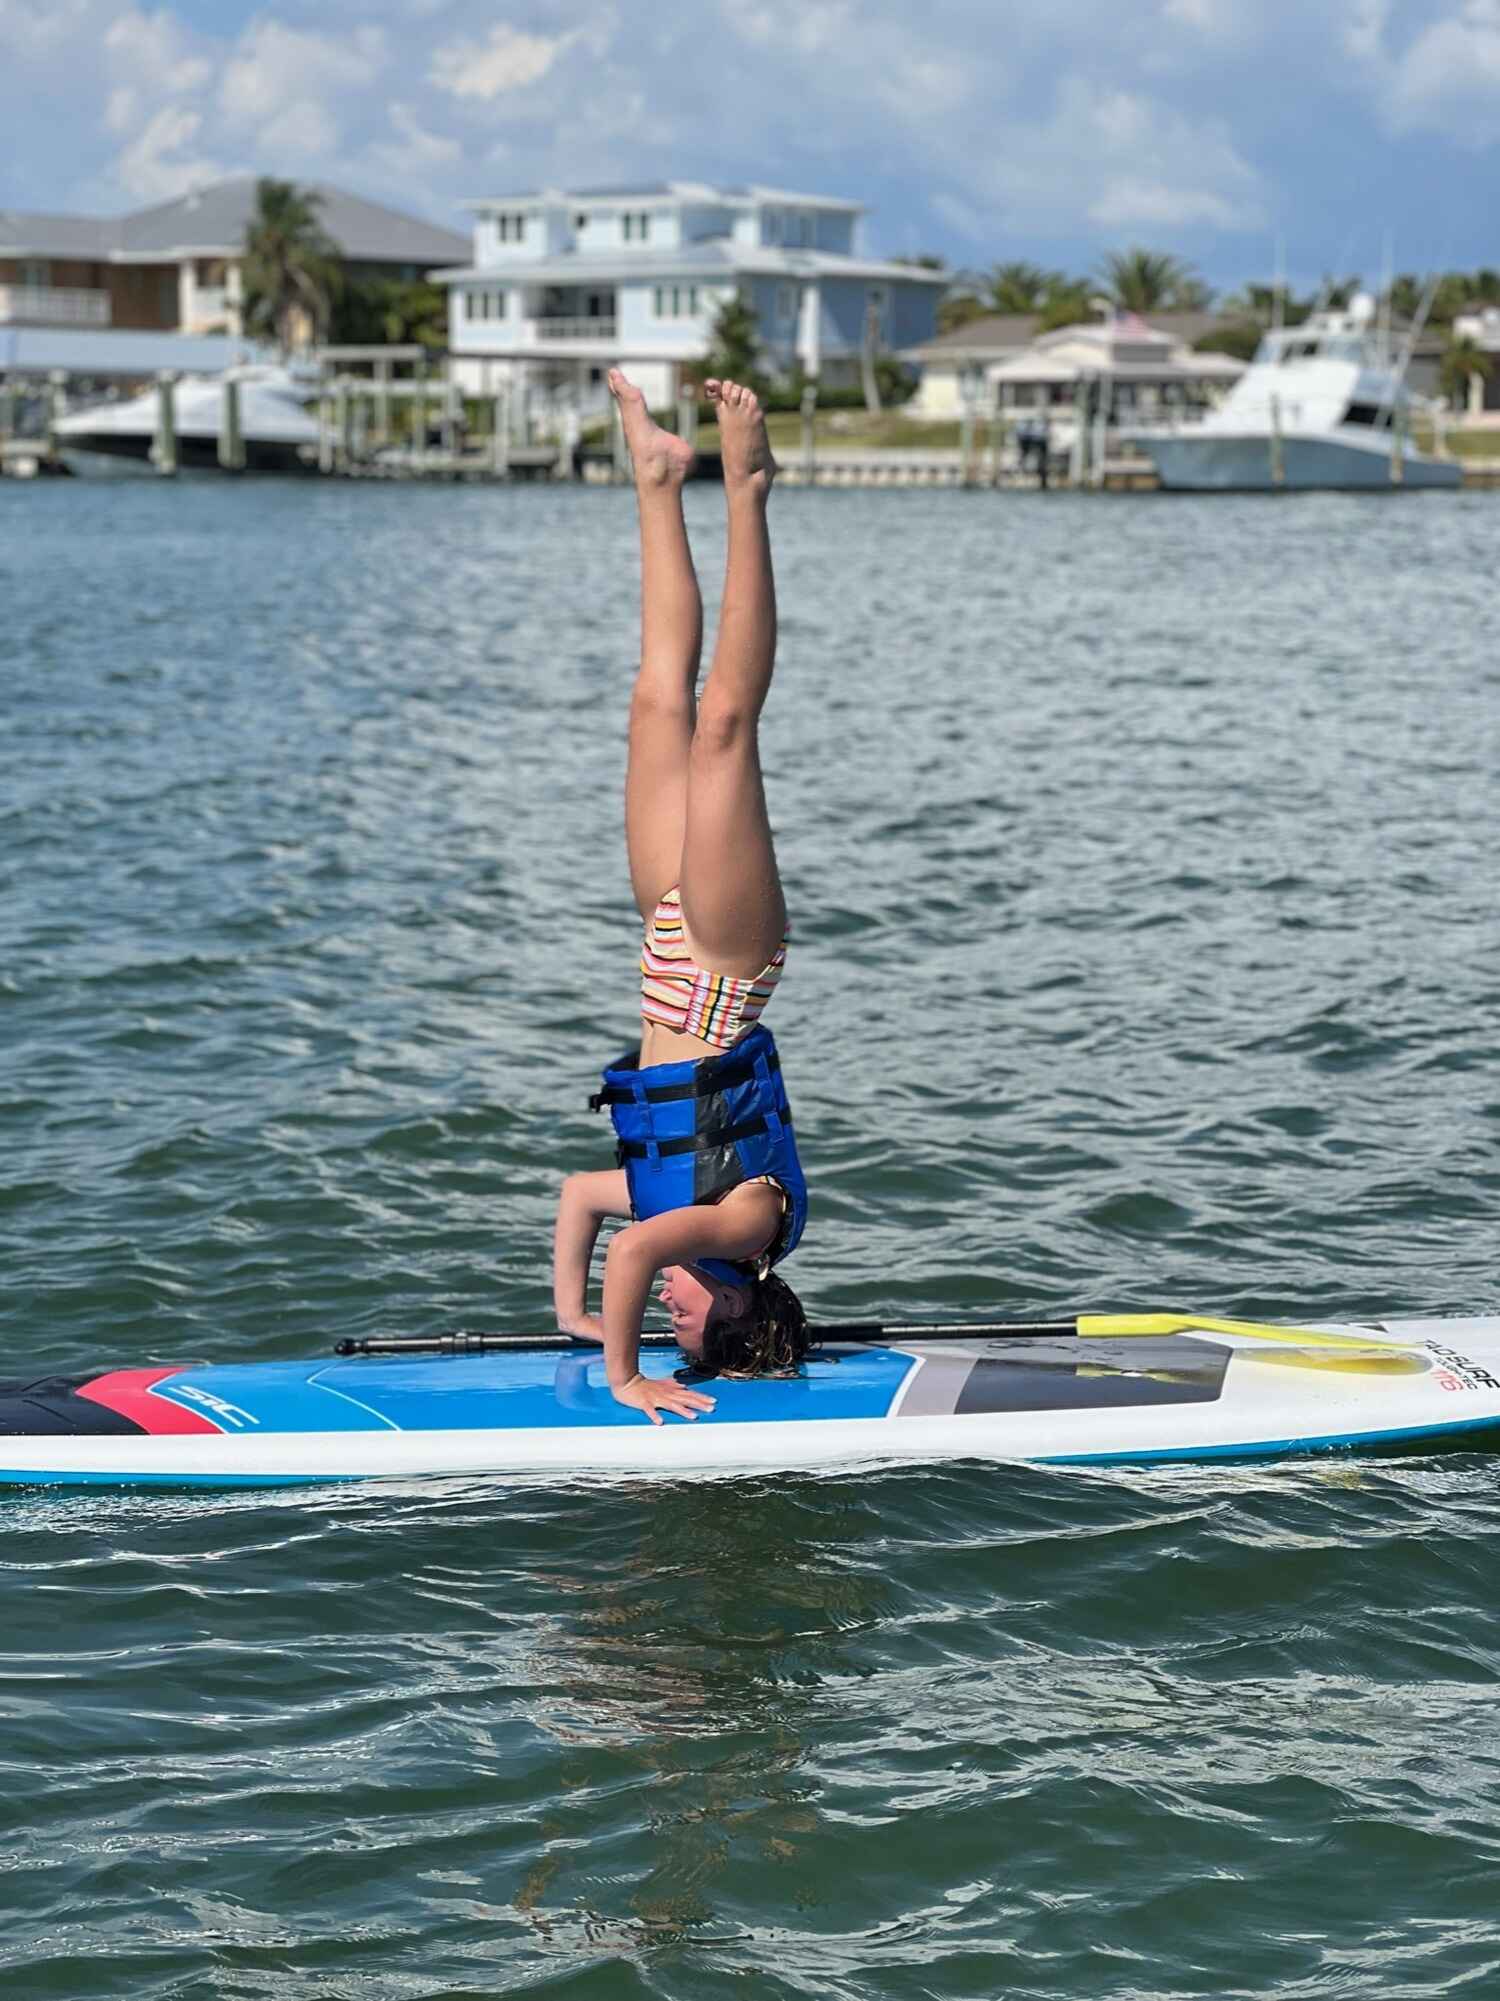 Young girl doing a headstand on a paddle board in the ocean